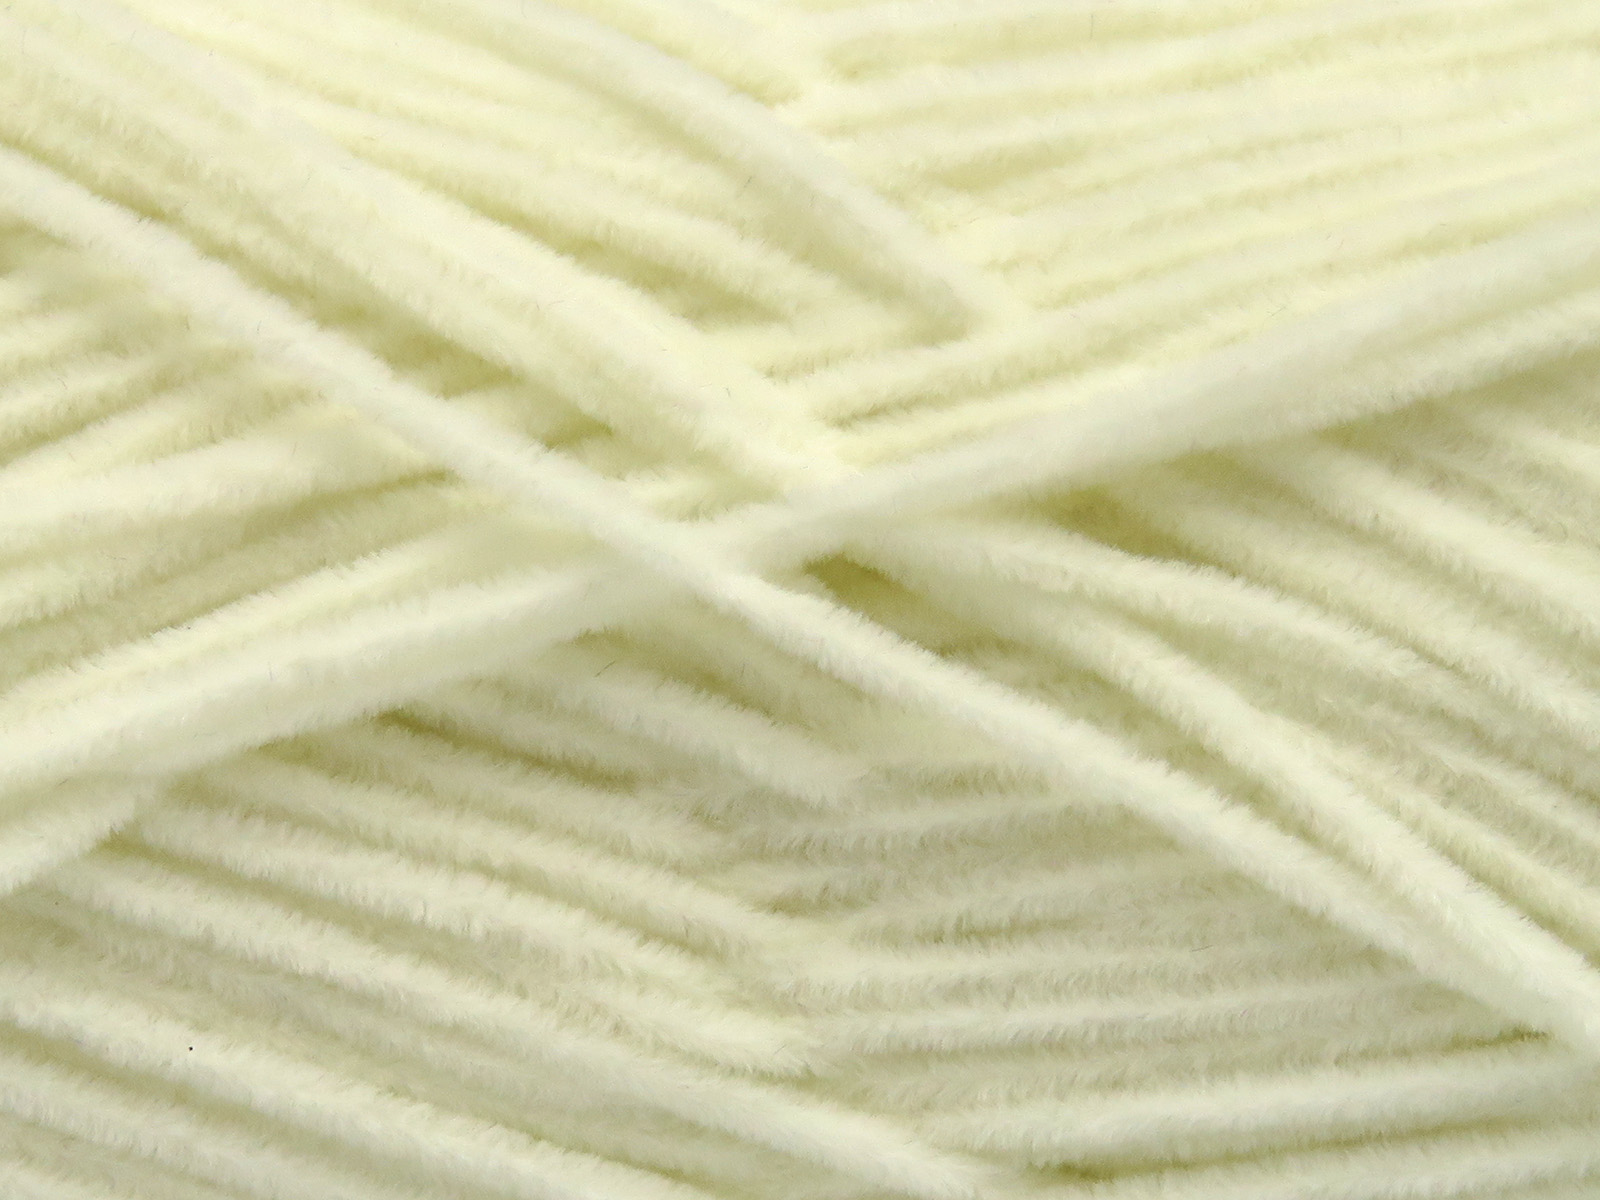 Thin Chenille at Ice Yarns Online Yarn Store